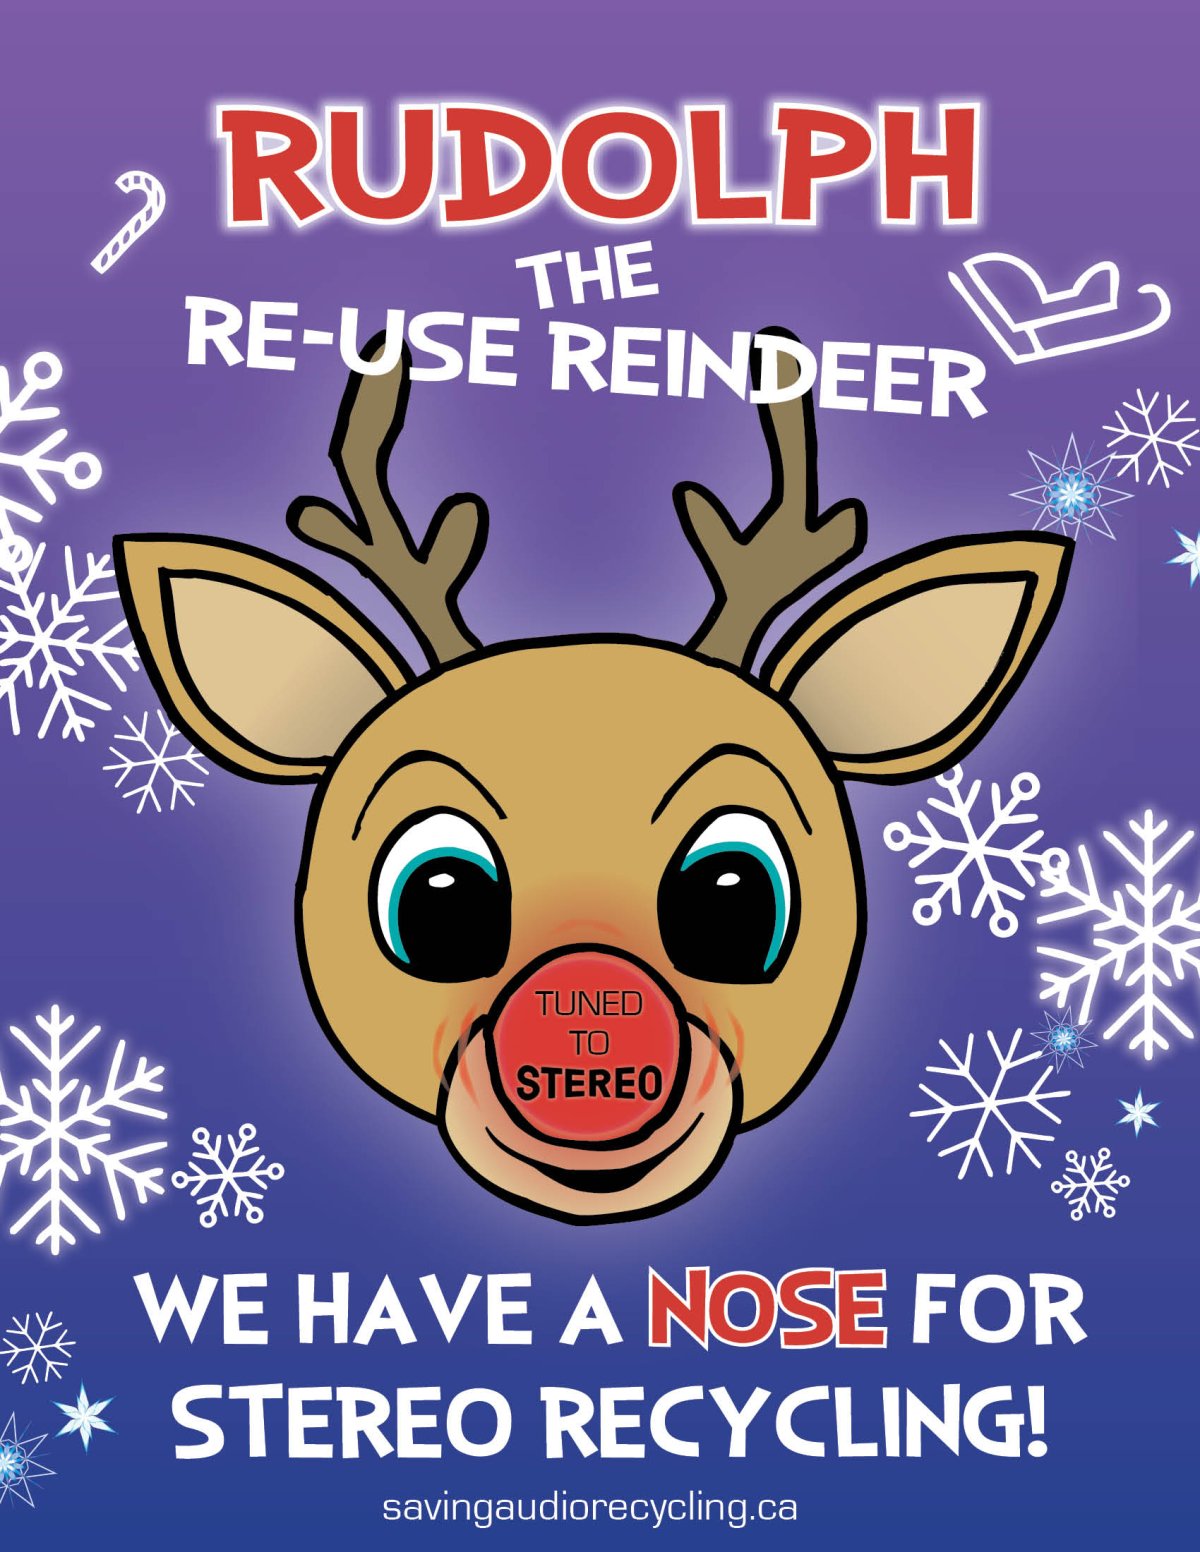 Rudolph the Re-Use Reindeer Stereo E-Waste Event - image